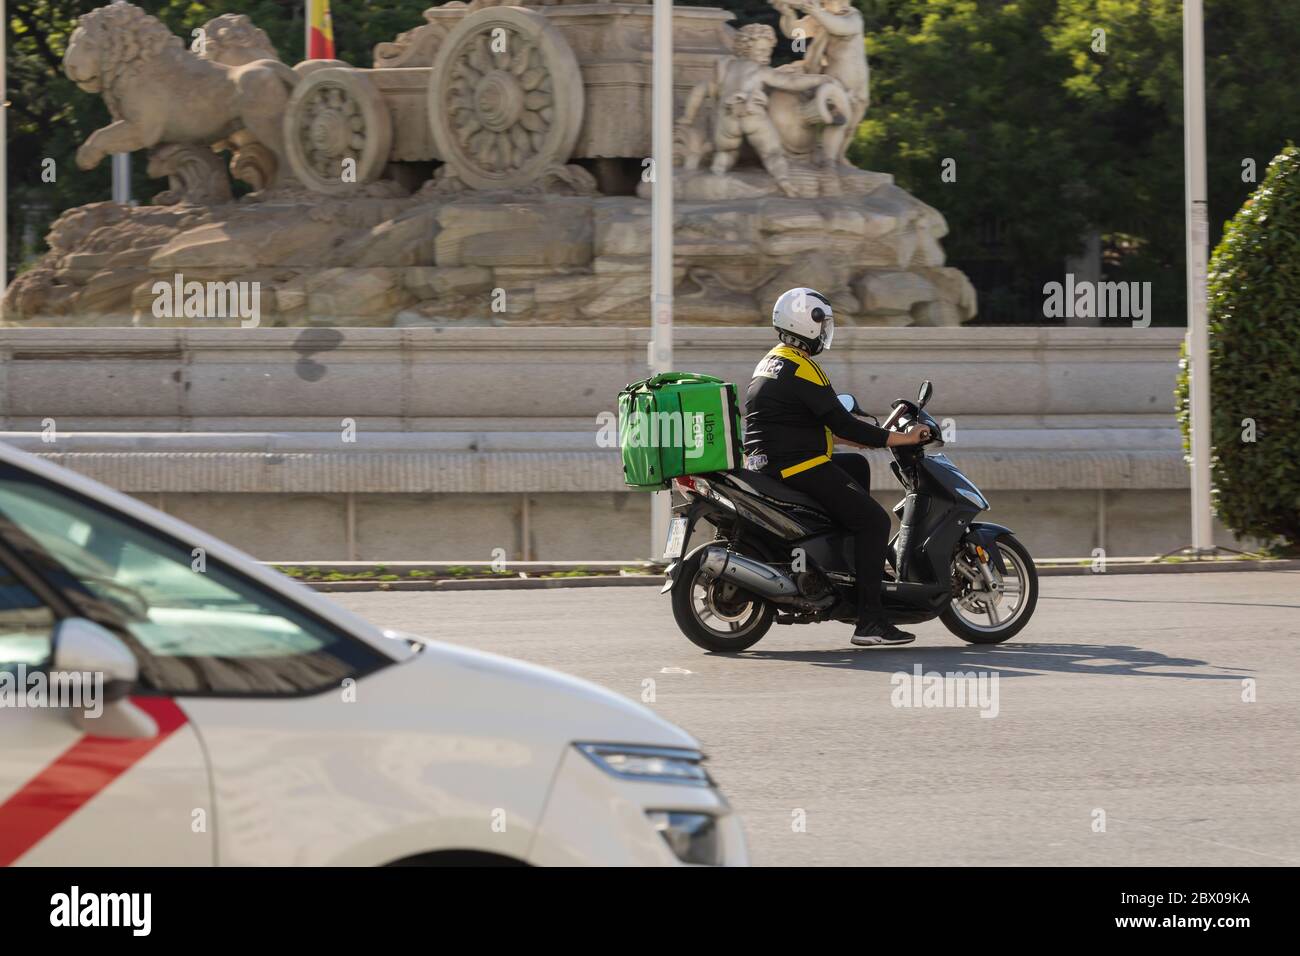 Madrid, Spain - May 19, 2020: Delivery people from the home delivery company, Uber Eats, working on the streets of Madrid, delivering food at rush hou Stock Photo